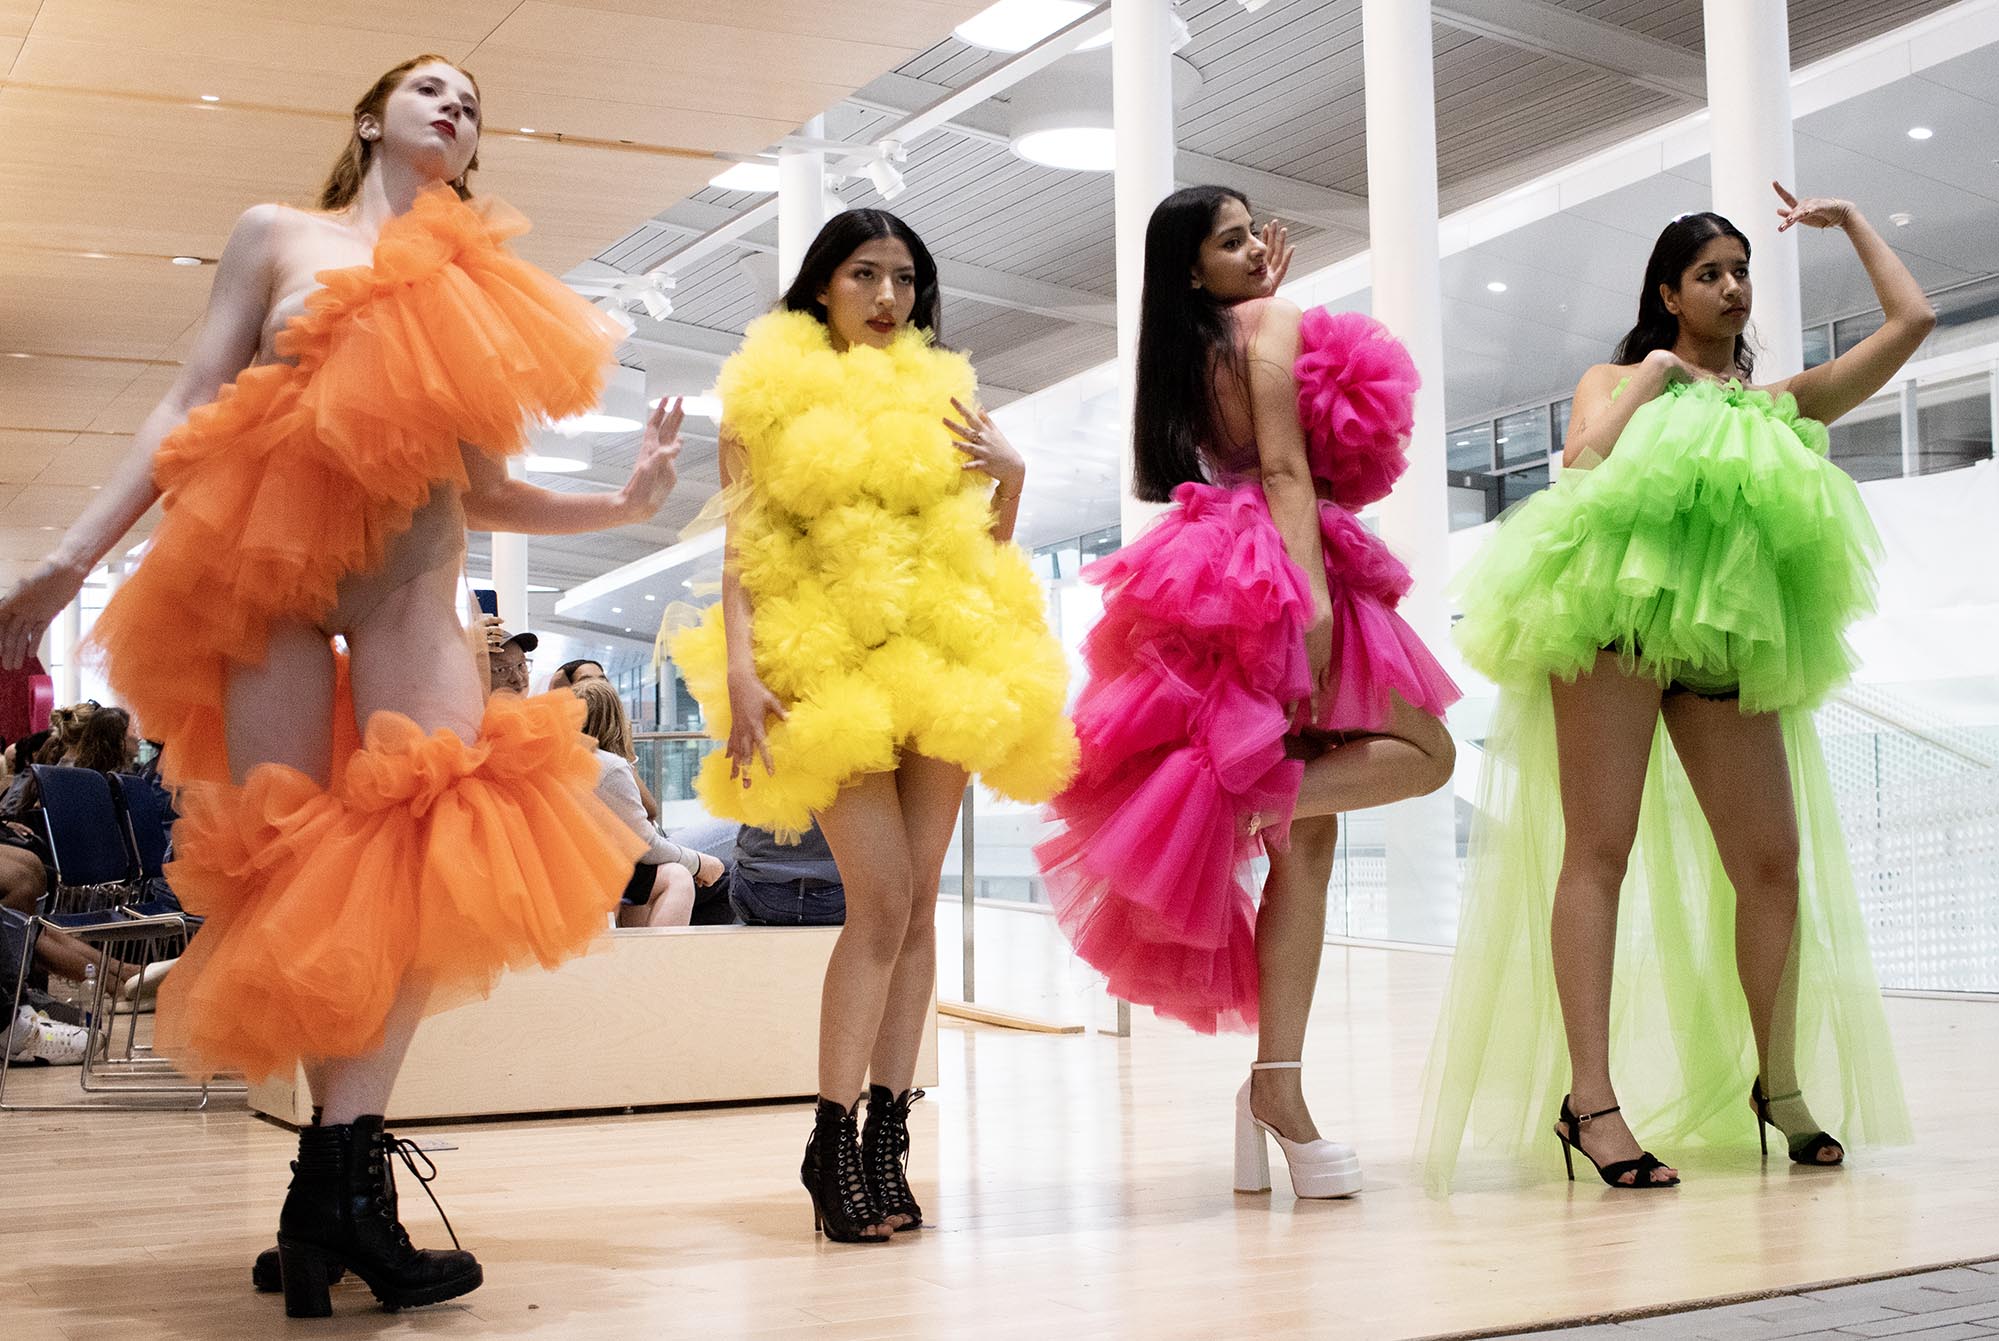 Re-Fashioned 2023, capstone collection from Miranda Mottlowitz. Models: Araditta Iyer, Sofia, Michaela Burrows, and Sharika. Each woman wears a different colored taffeta dress. One is orange, one is yellow, one is pink, and one is green.